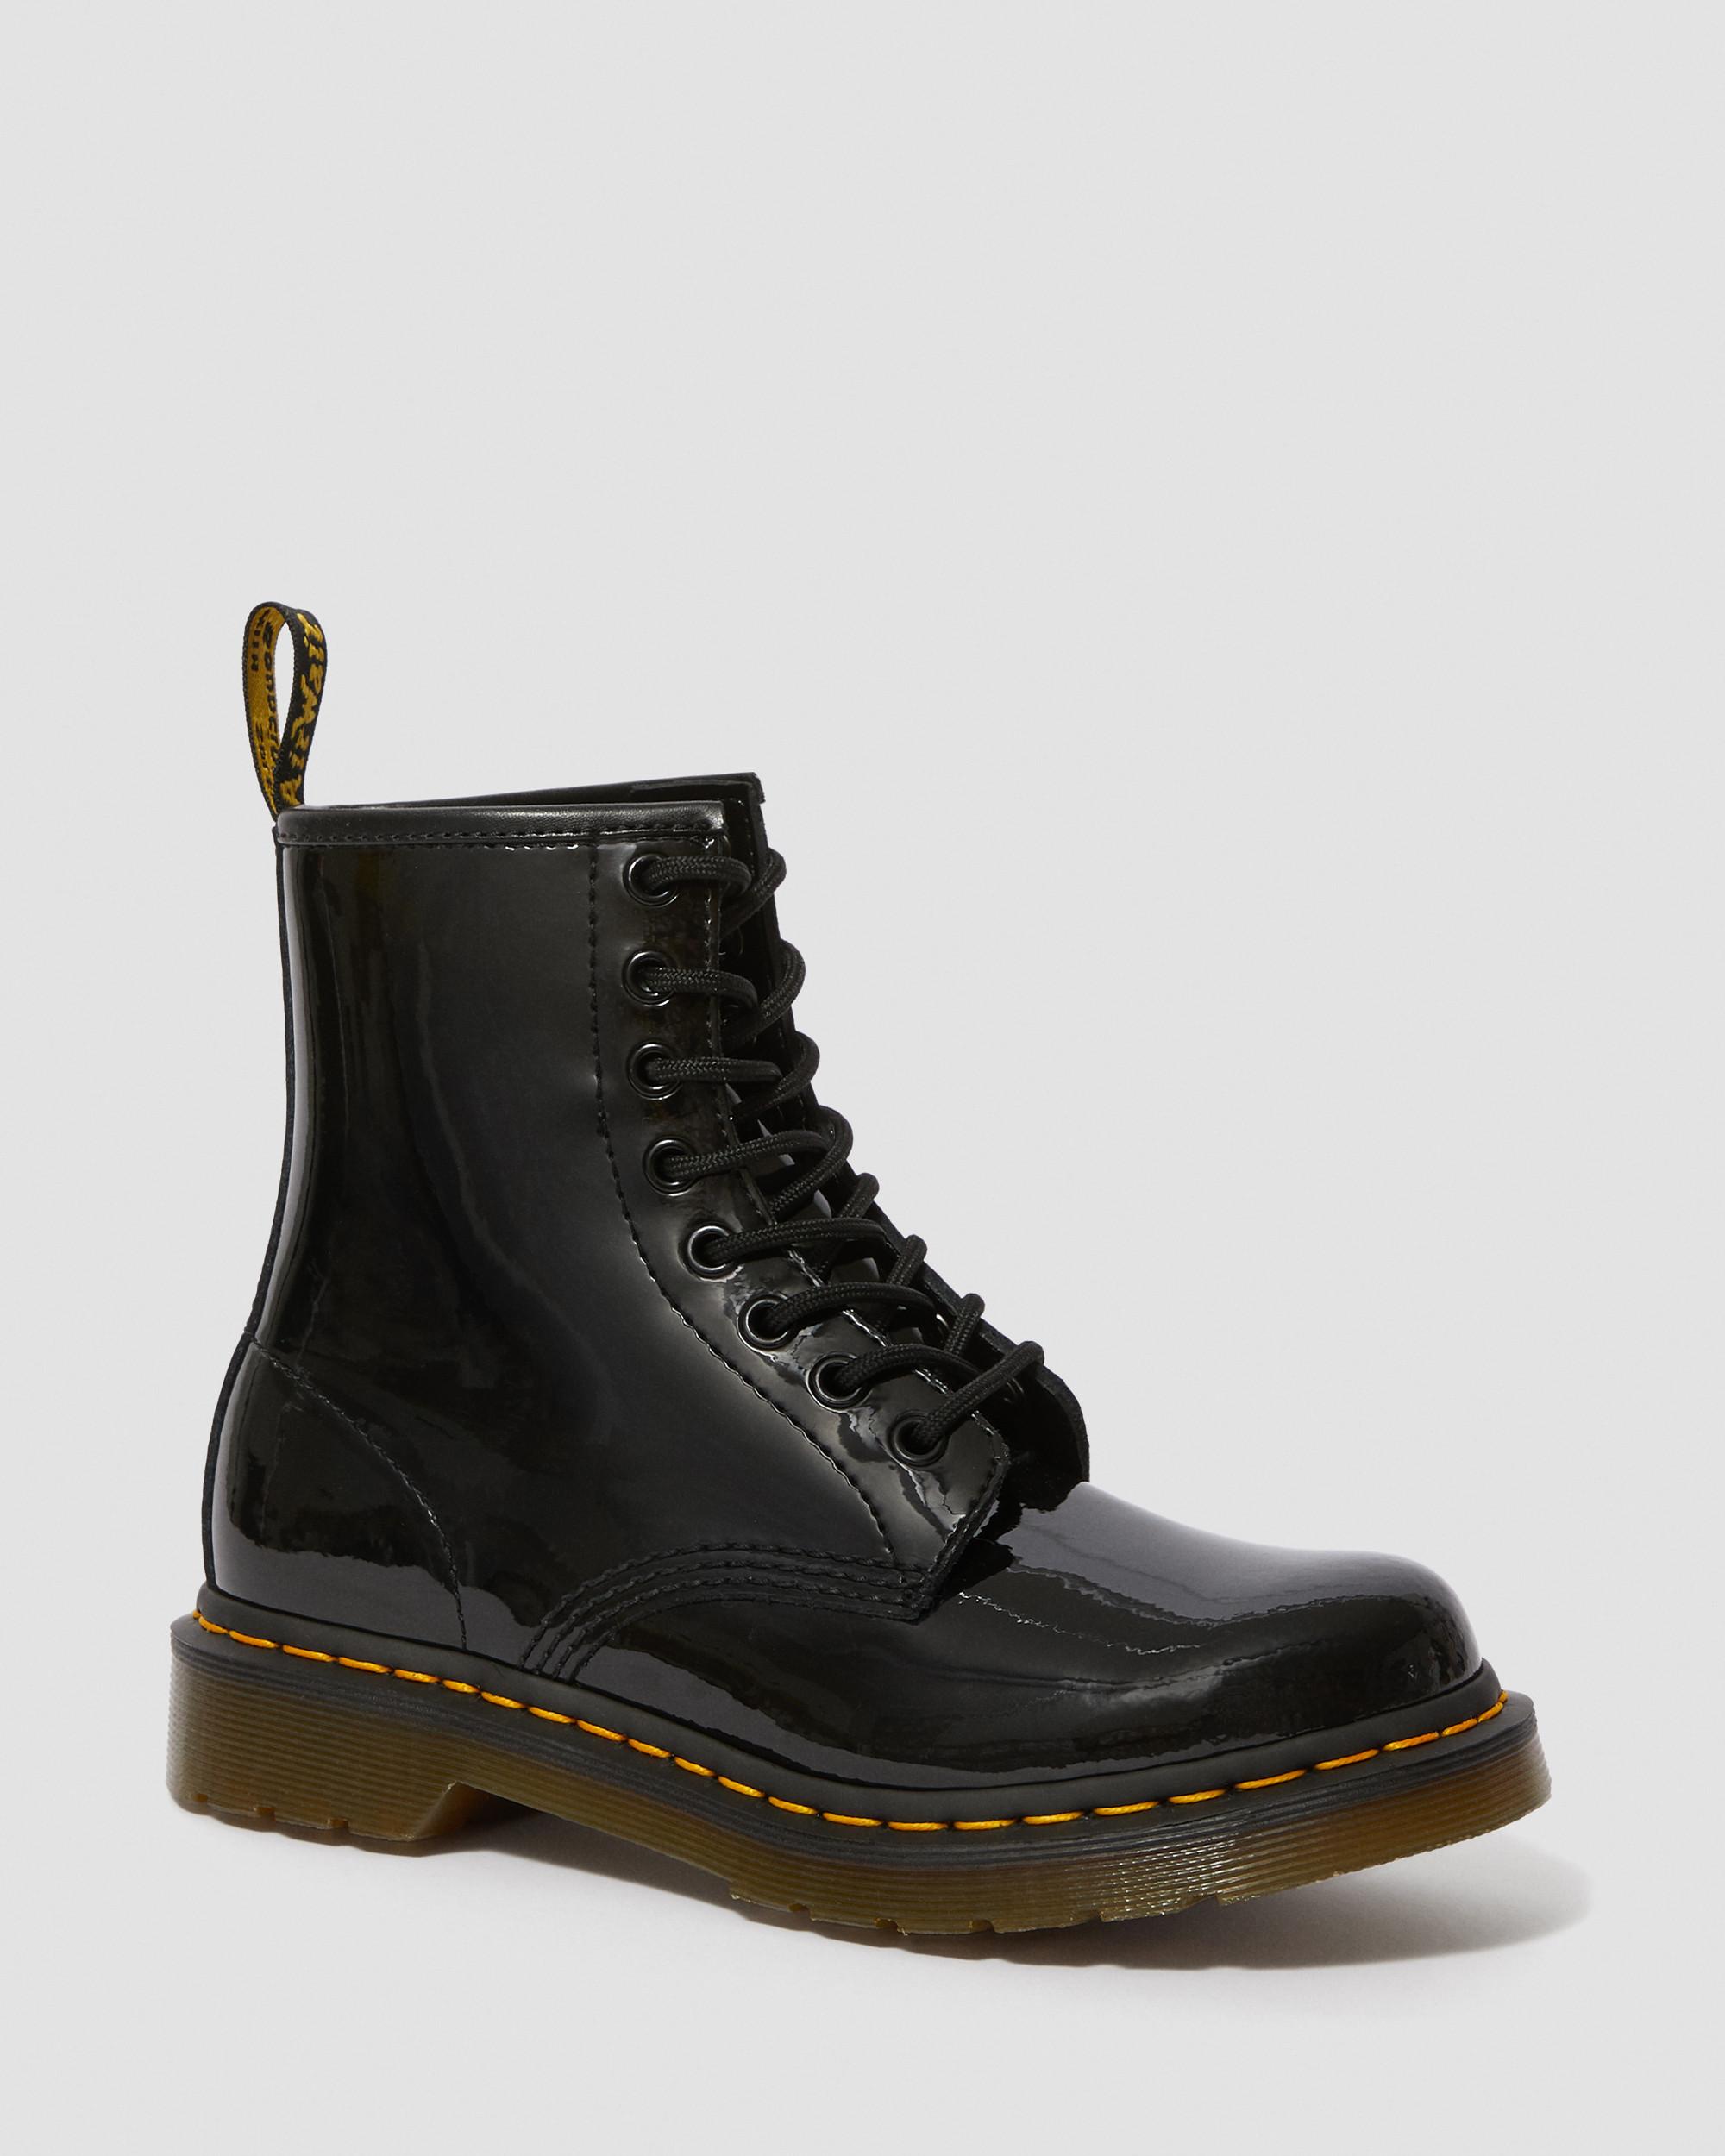 PATENT LEATHER LACE UP BOOTS 